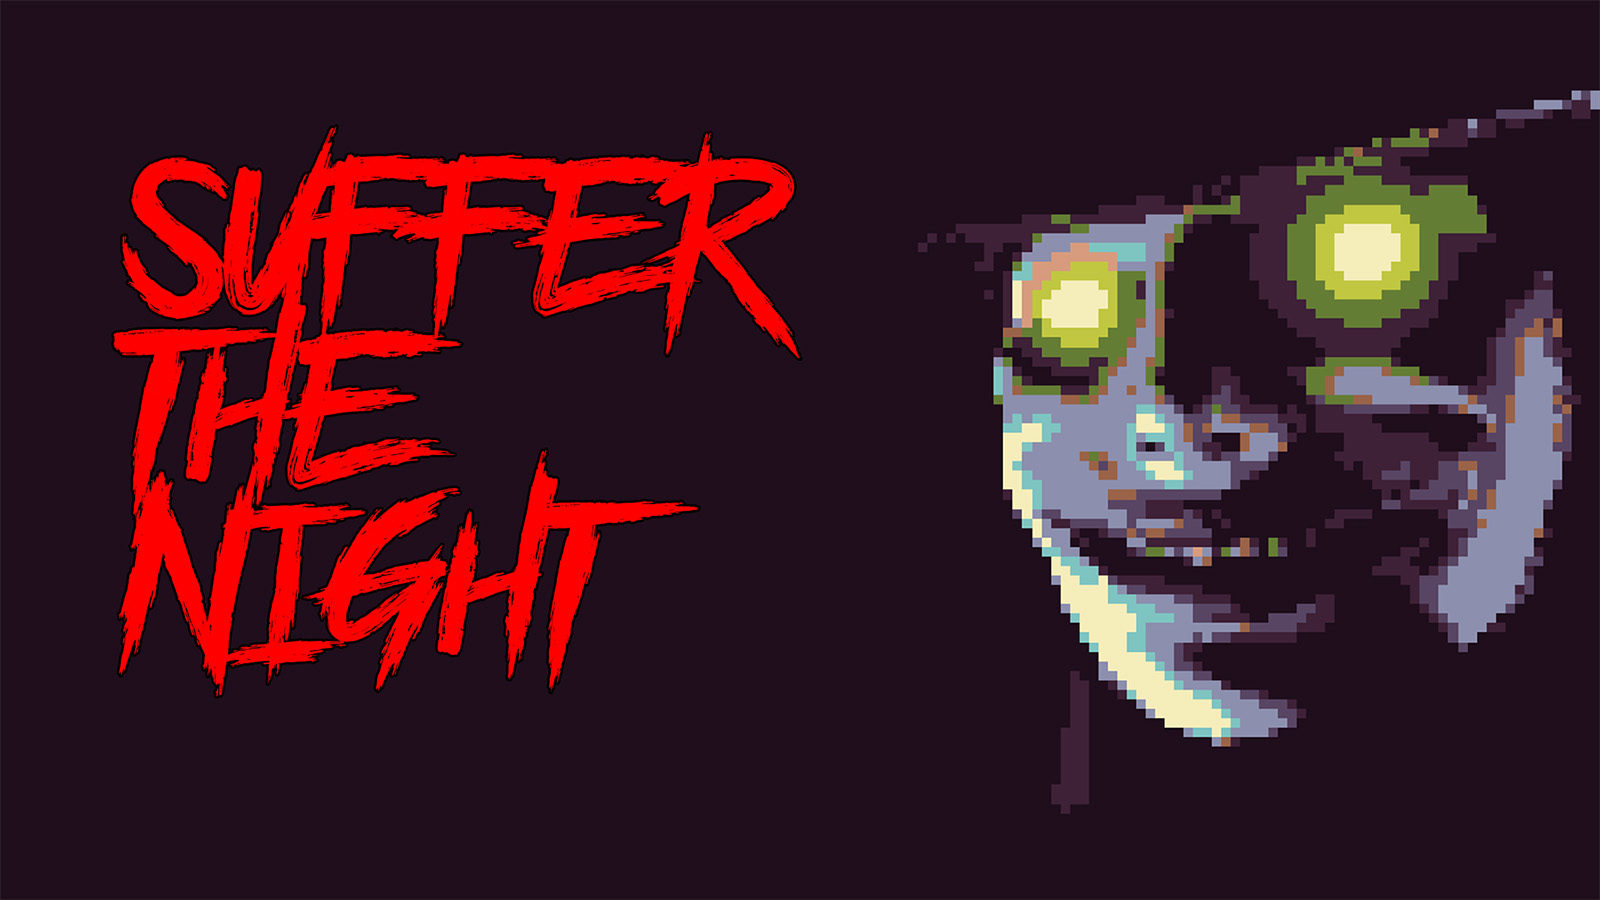 Slasher Horror Game Suffer The Night Will Launch In April For PC